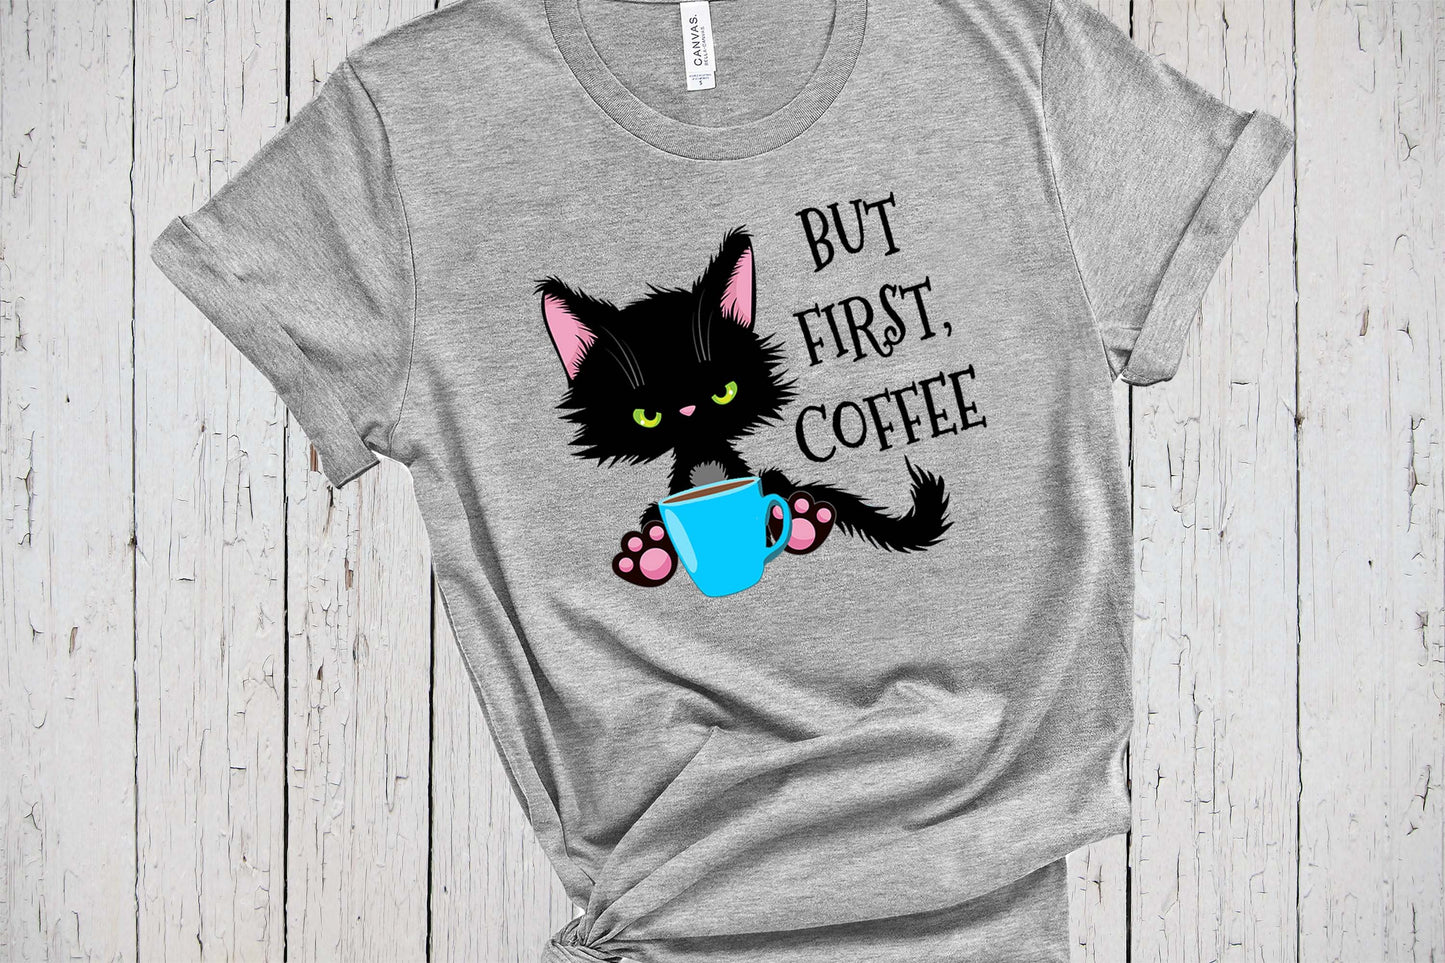 But First Coffee T-Shirt, Crazy Cat Lady, Mom Life Shirt, Mother's Day Shirt, Coffee Lovers Gift, Black Cat, Funny Cat Shirt, Caffeine Shirt